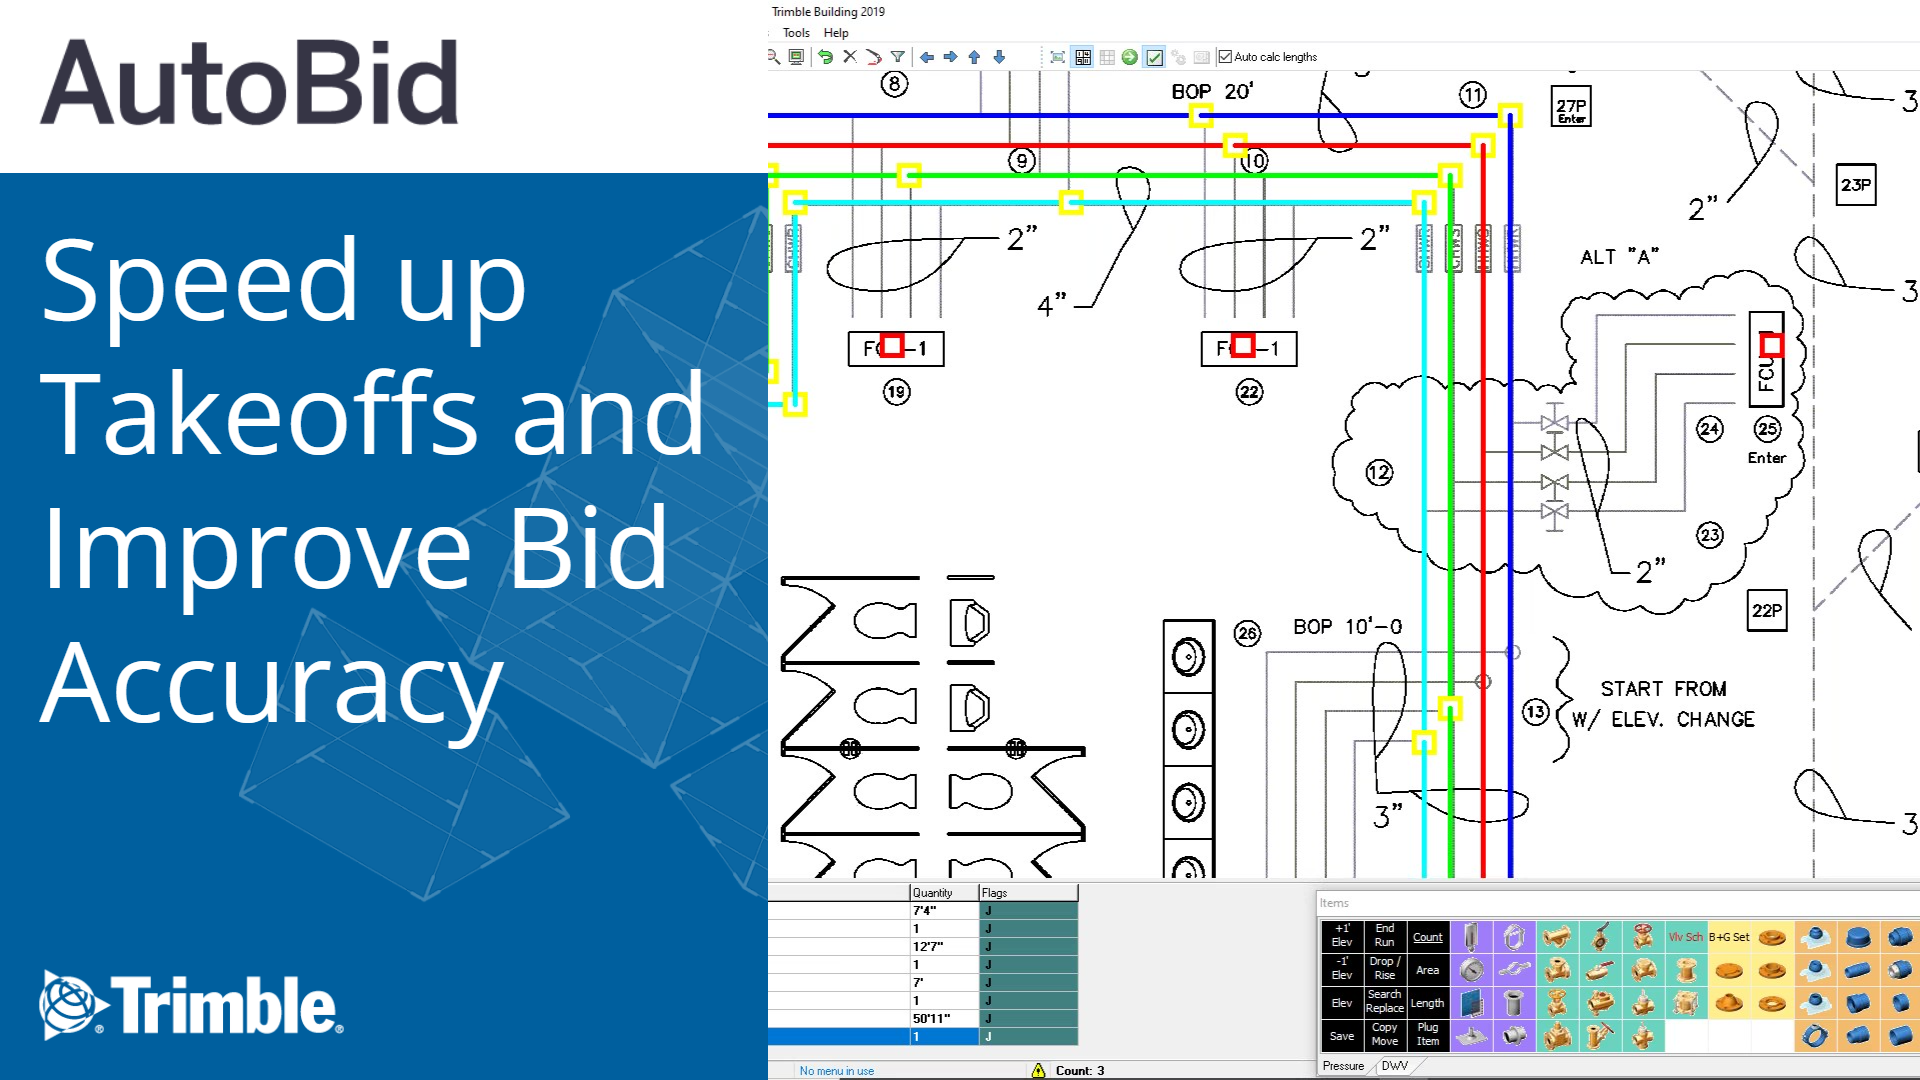 [Webinar Recording] Speed up Takeoffs and Improve Bid Accuracy with Trimble AutoBid